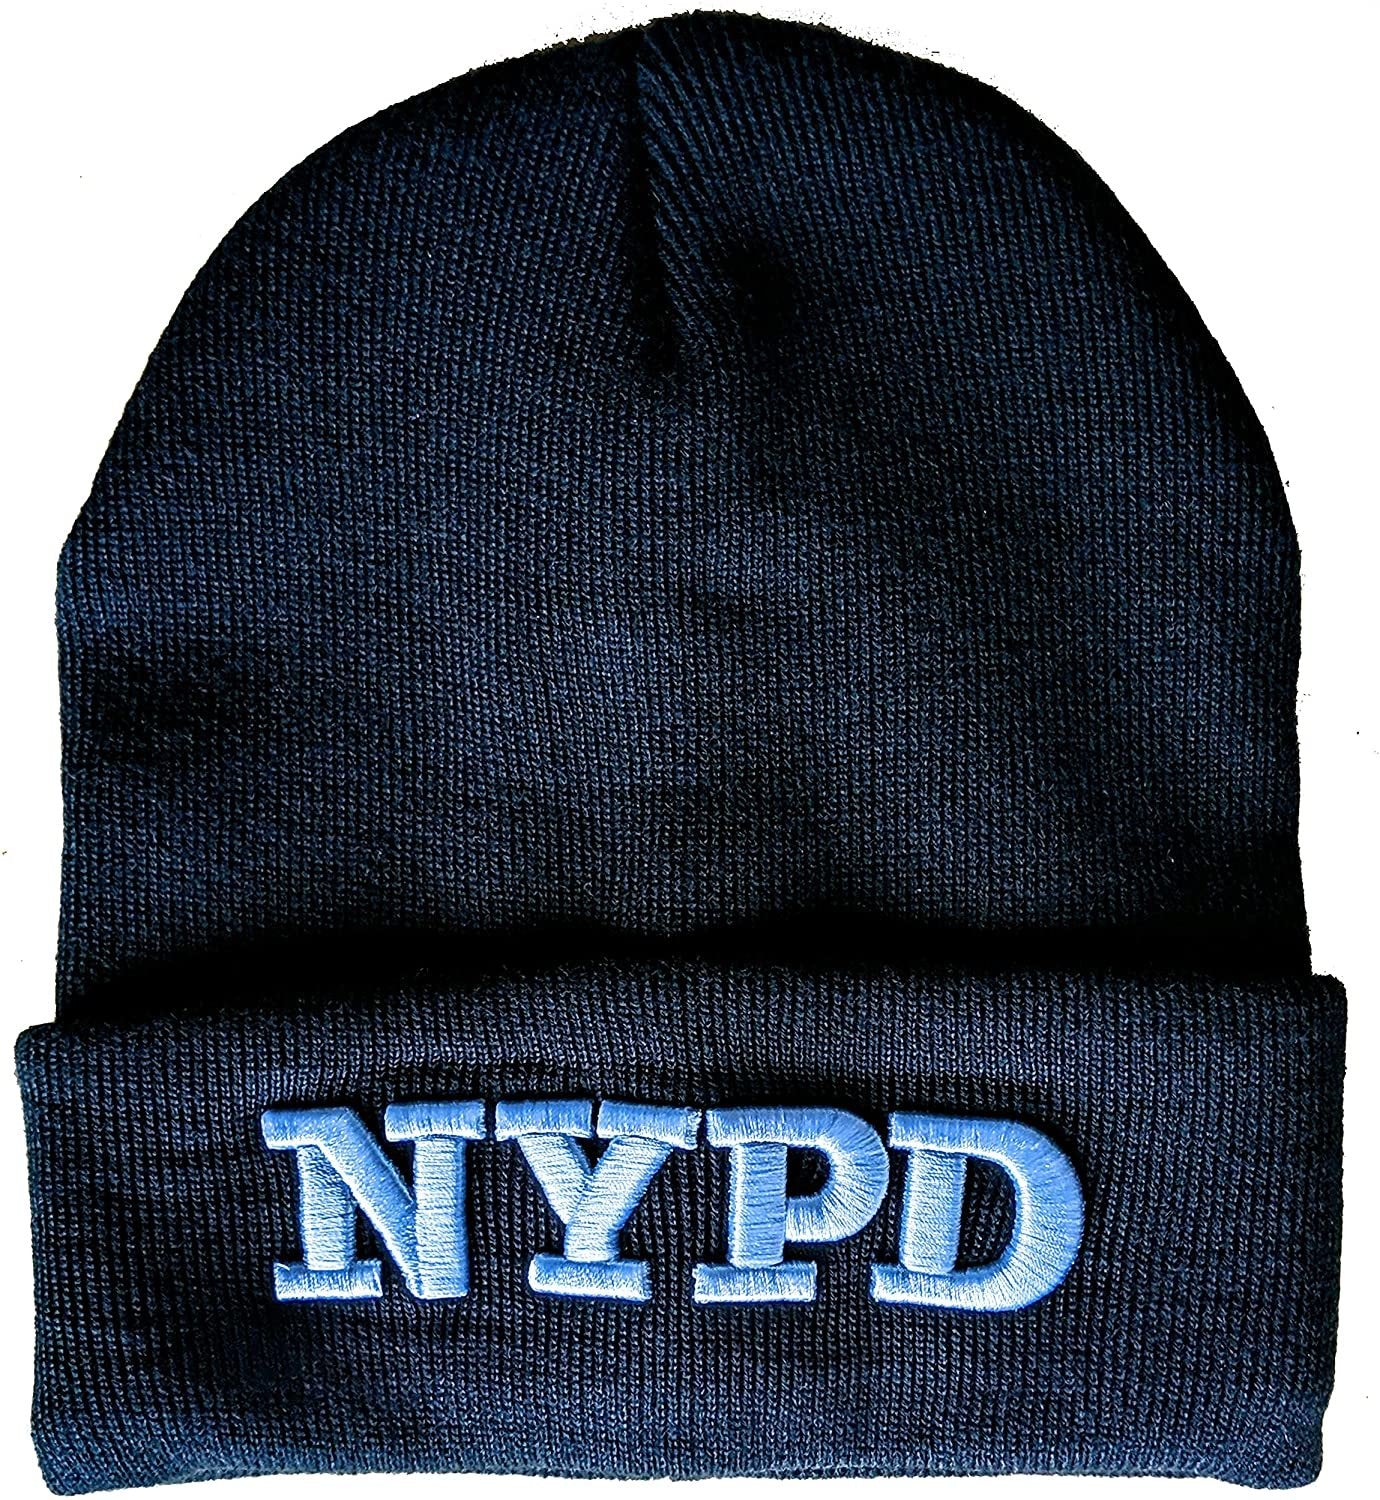 NYPD Beanies Officially Licensed Cold Weather Winter Hats